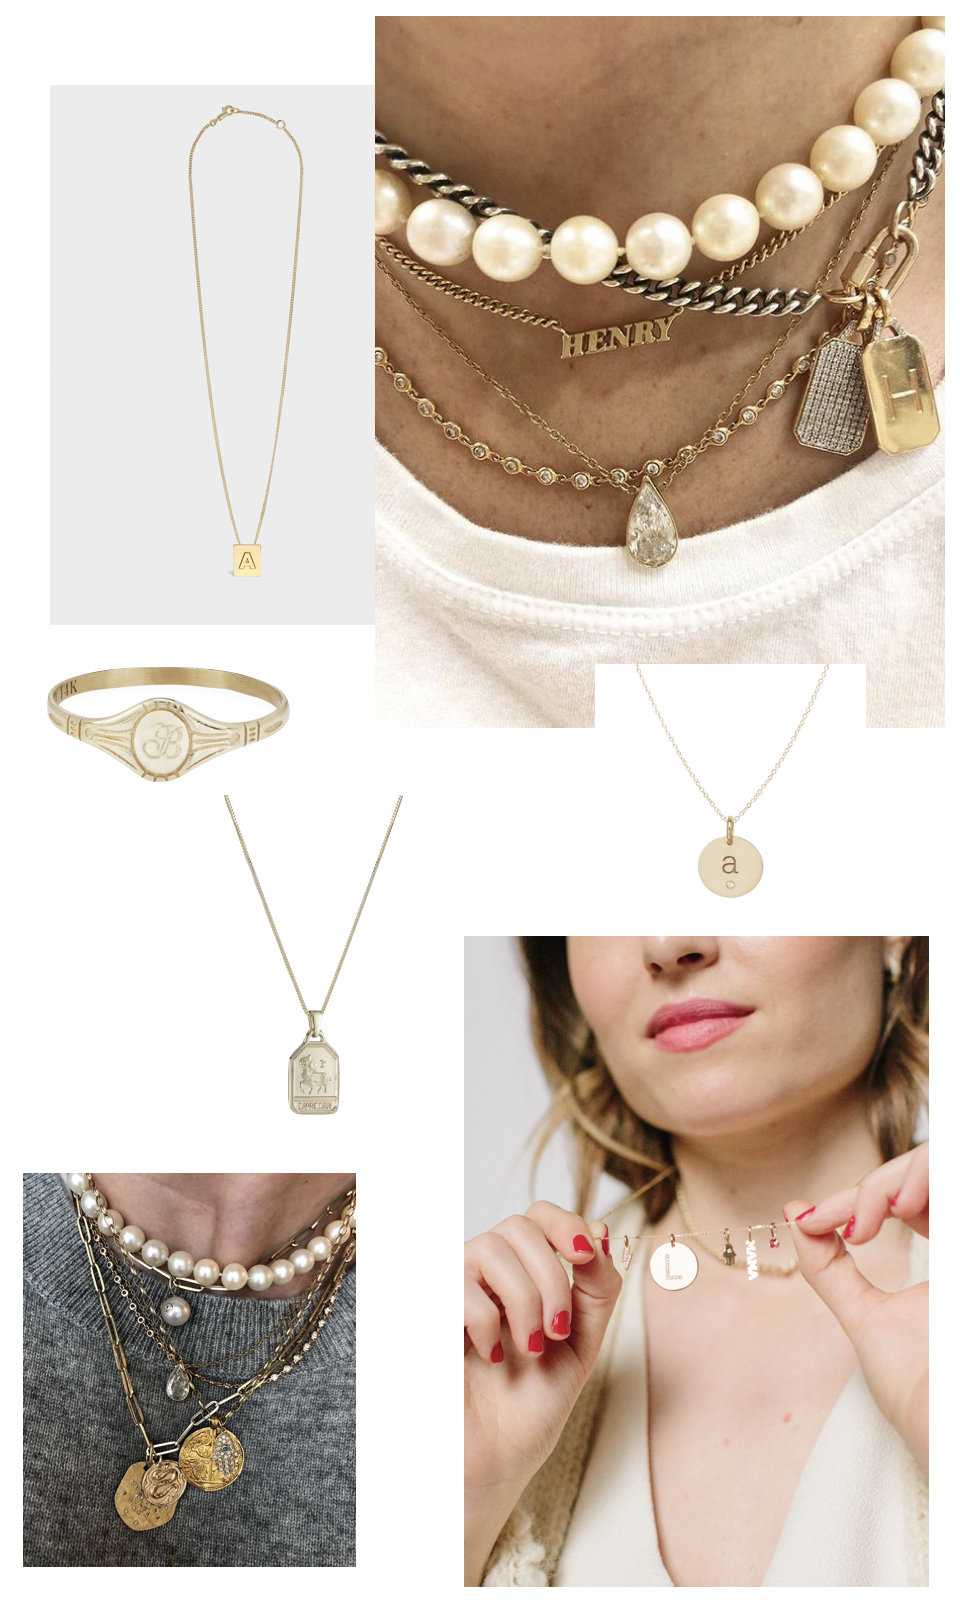 personalized jewelry edit | Mother's Day Gift Ideas